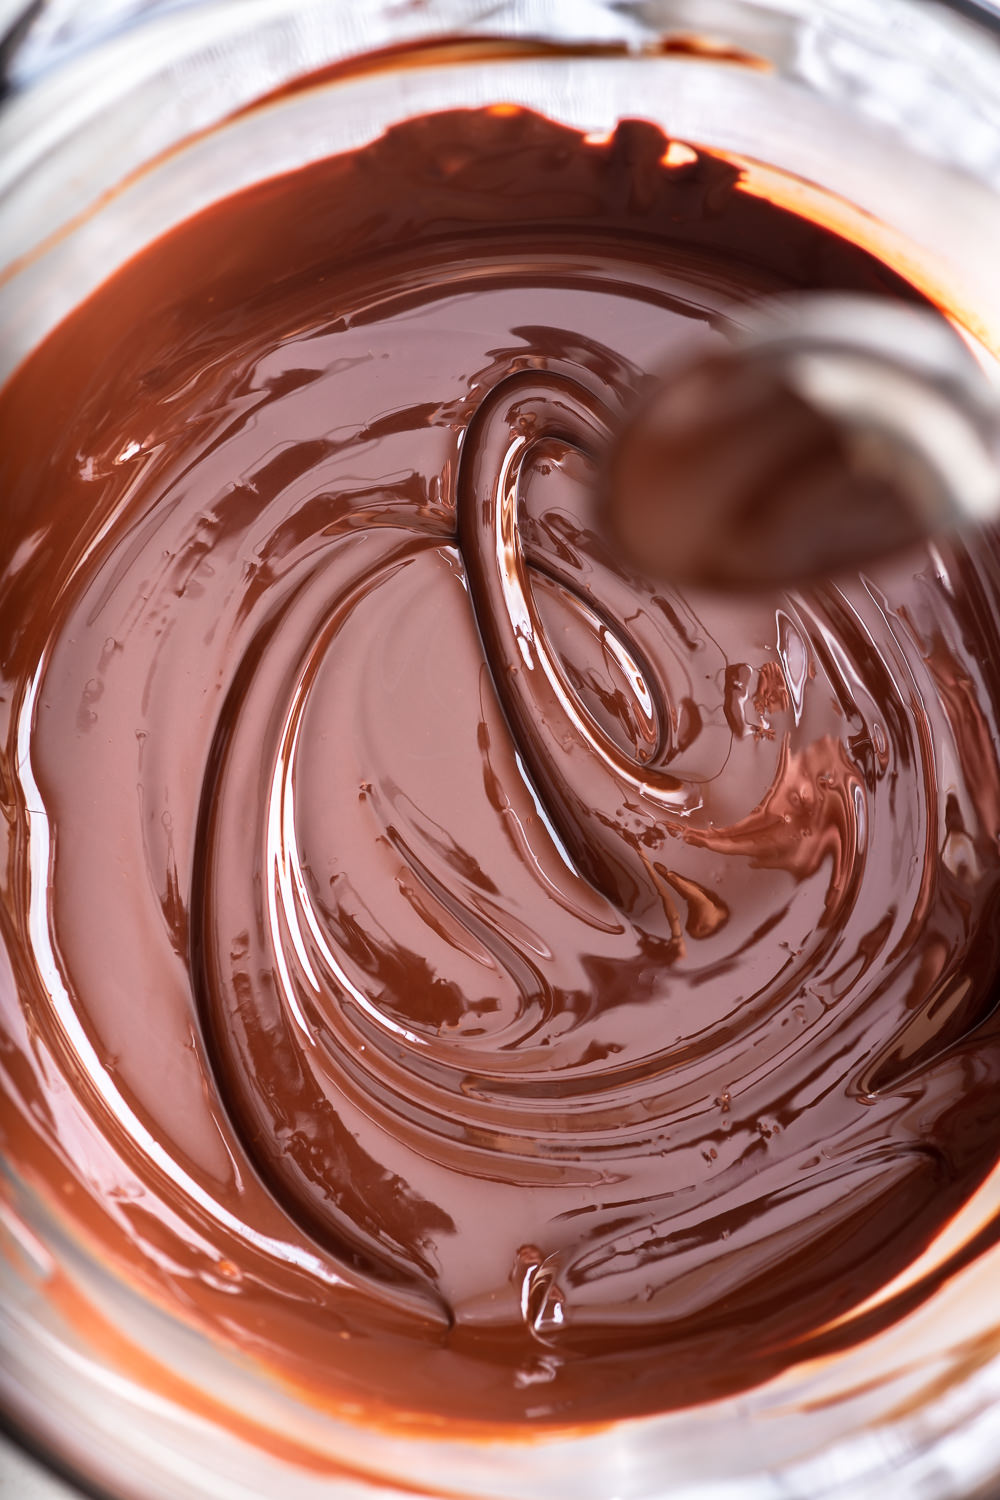 How to Temper Chocolate With or Without a Thermometer